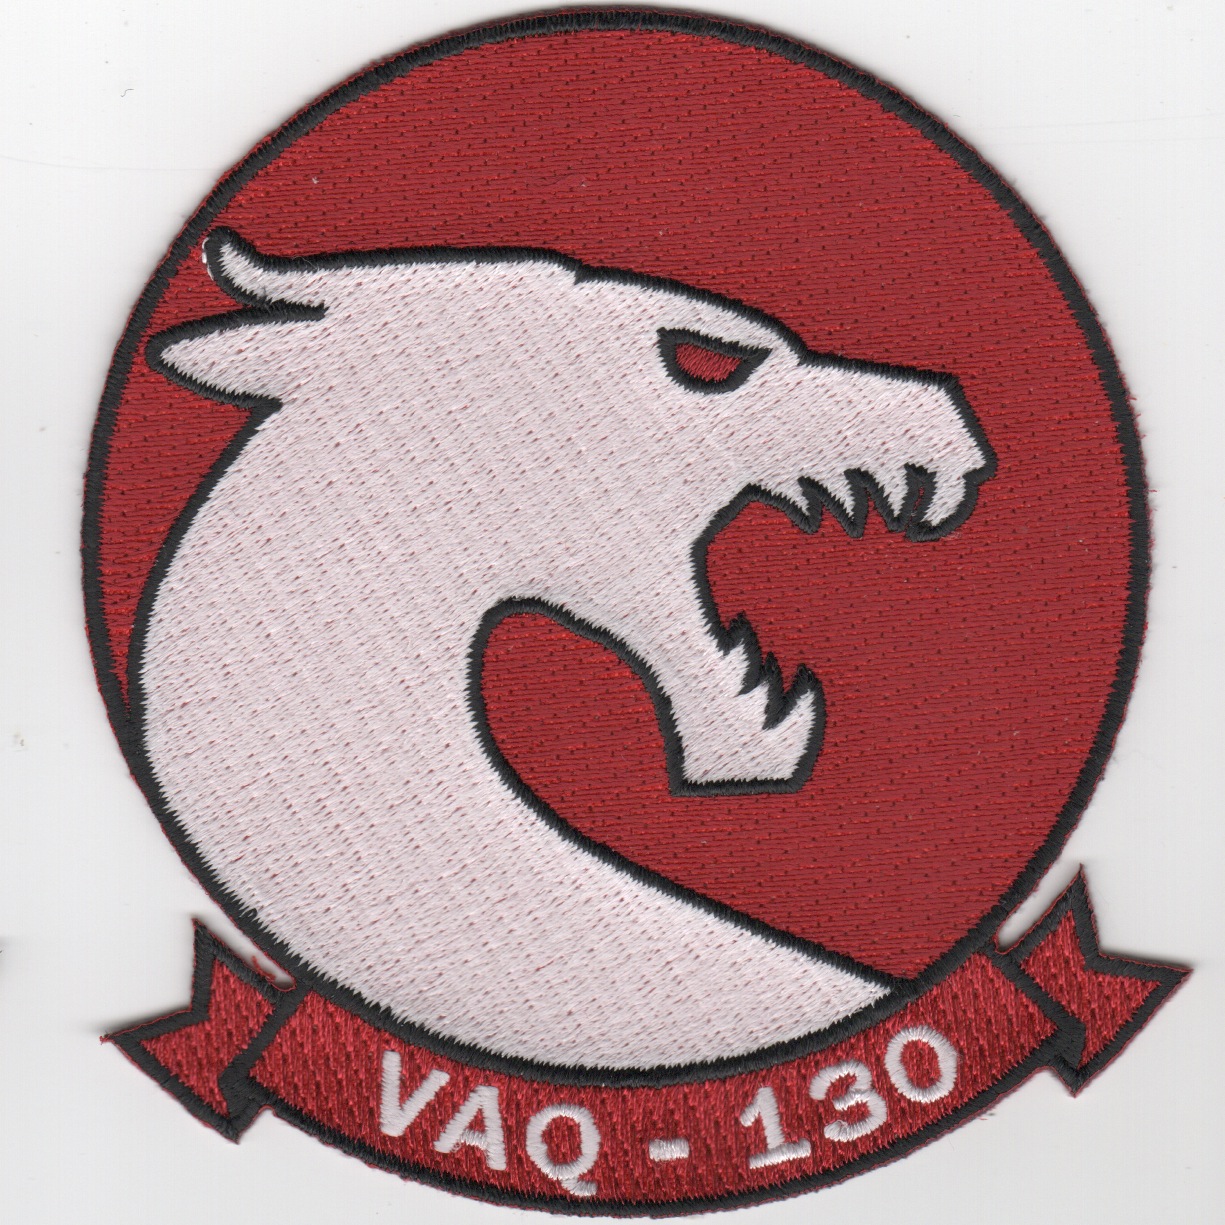 VAQ-130 Squadron Patch (Red/White)